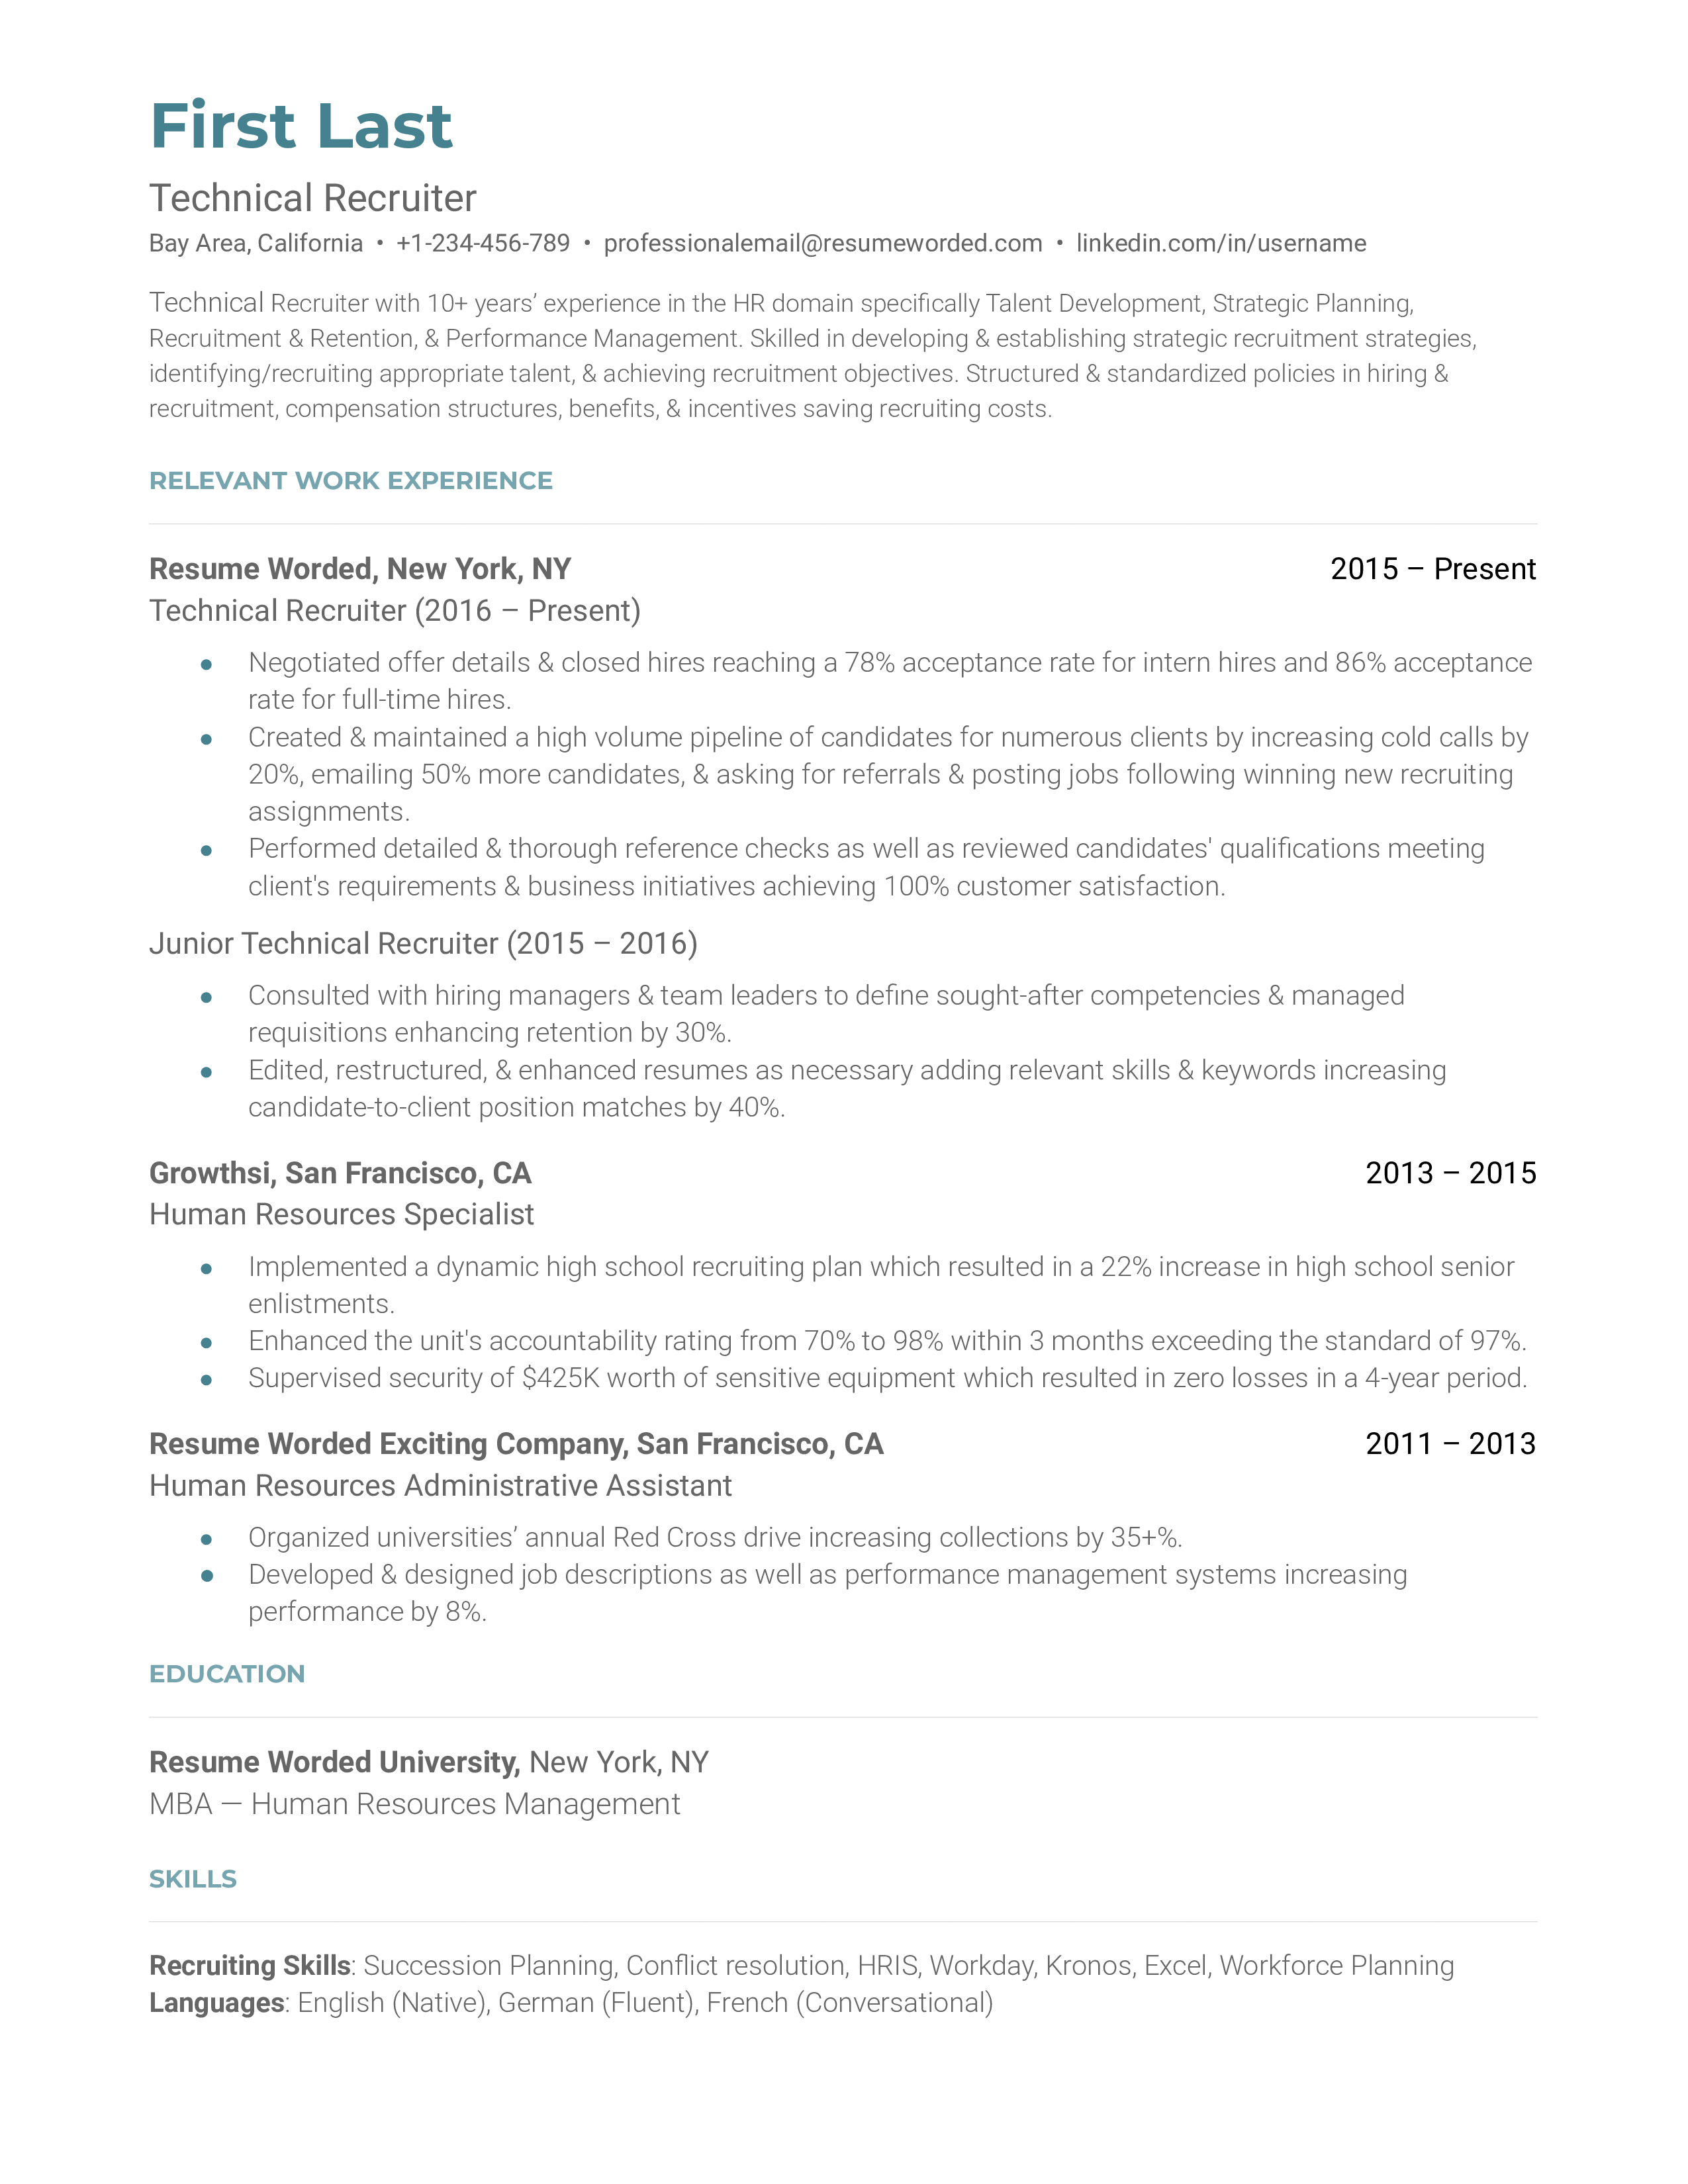 Technical Recruiter Resume Template + Example